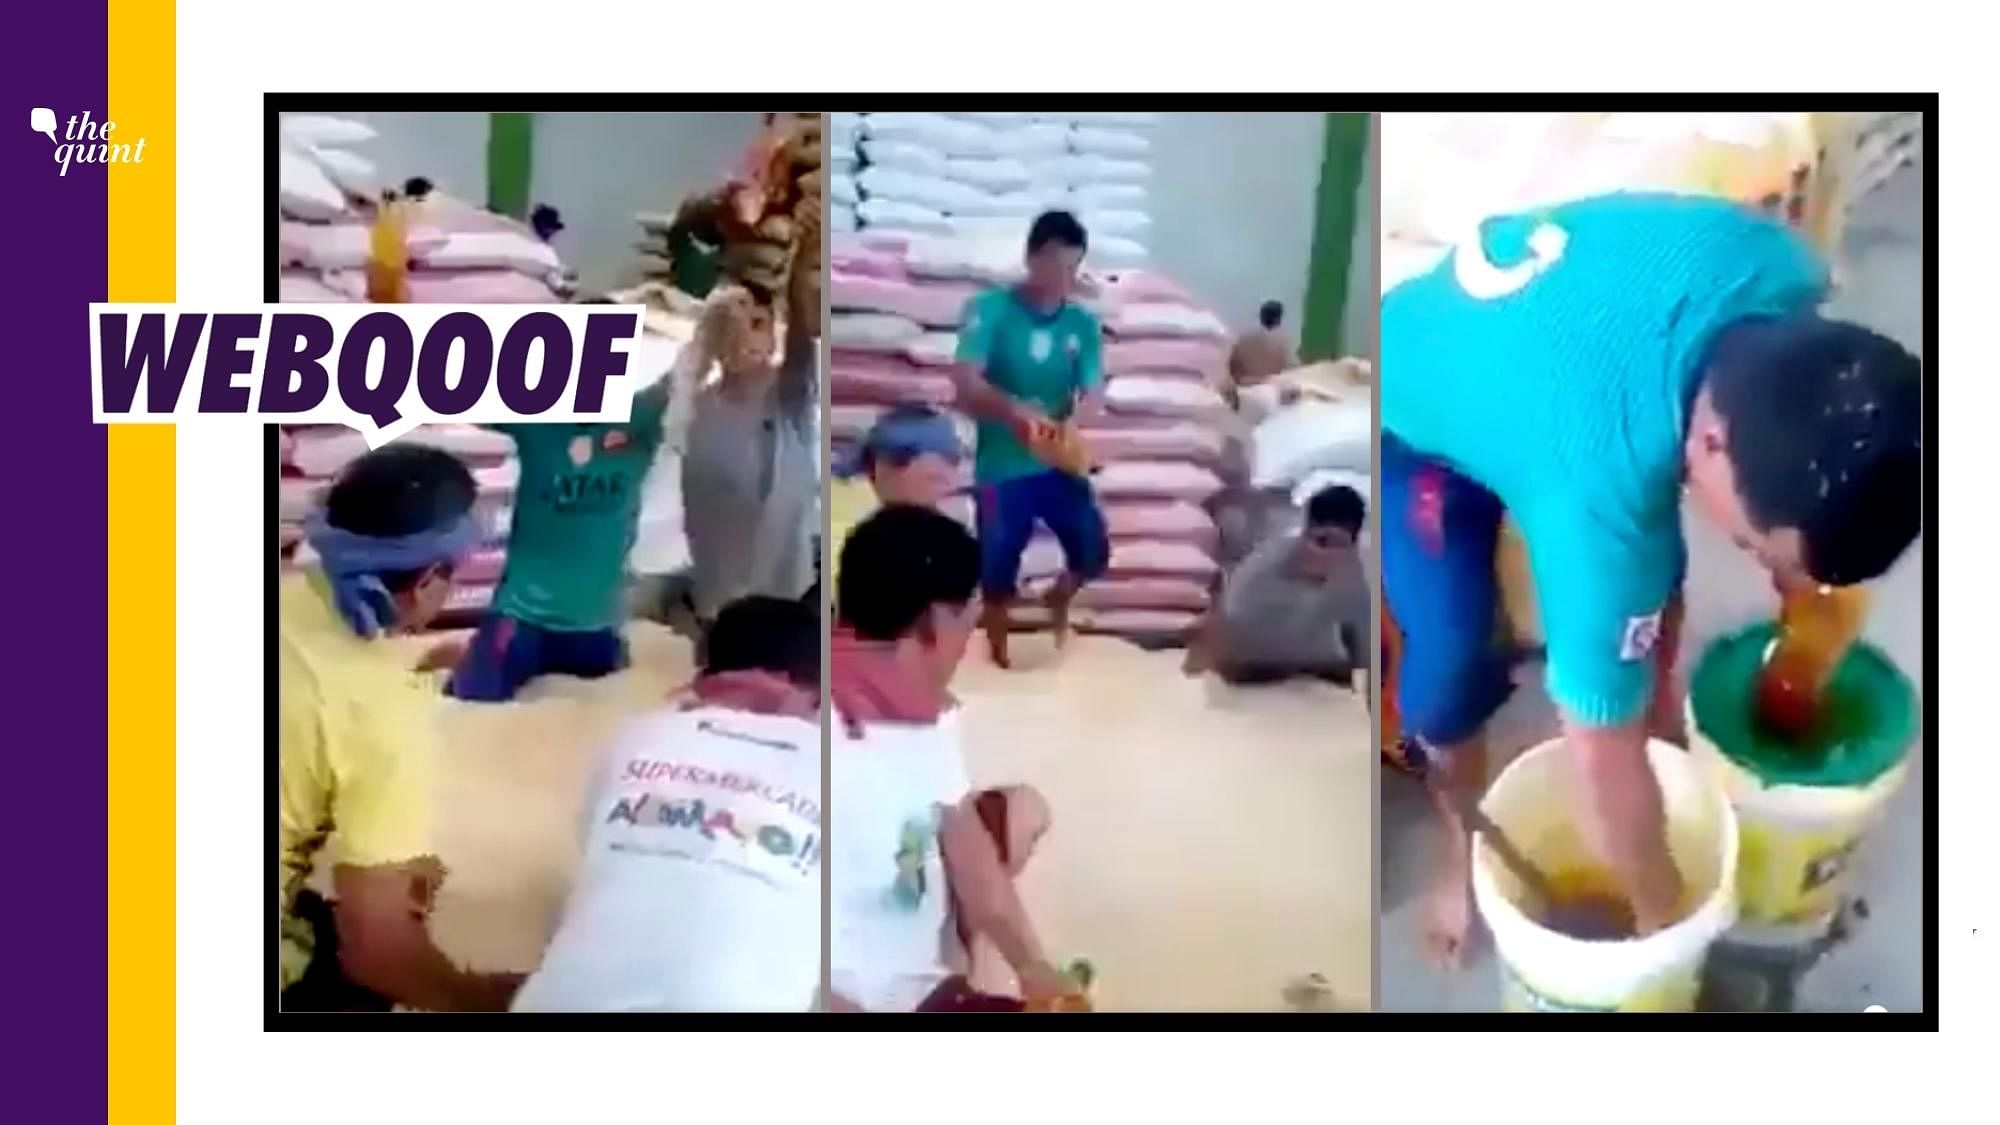 <div class="paragraphs"><p>A video from Peru showing people mixing something in rice has been shared with a communal spin.&nbsp;</p></div>